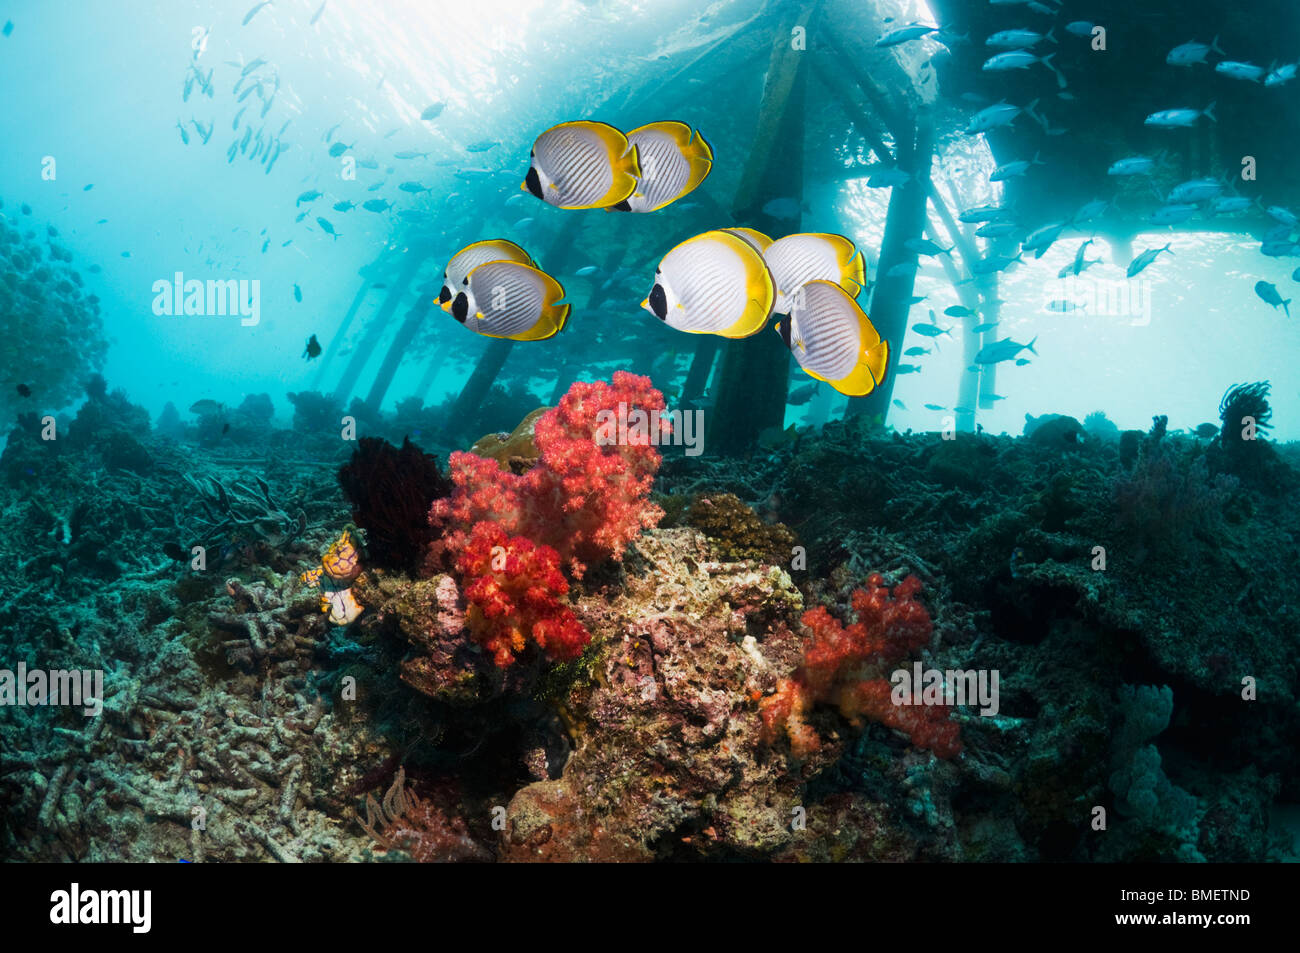 Panda butterflyfish with jetty in background.  Misool, Raja Empat, West Papua, Indonesia. Stock Photo